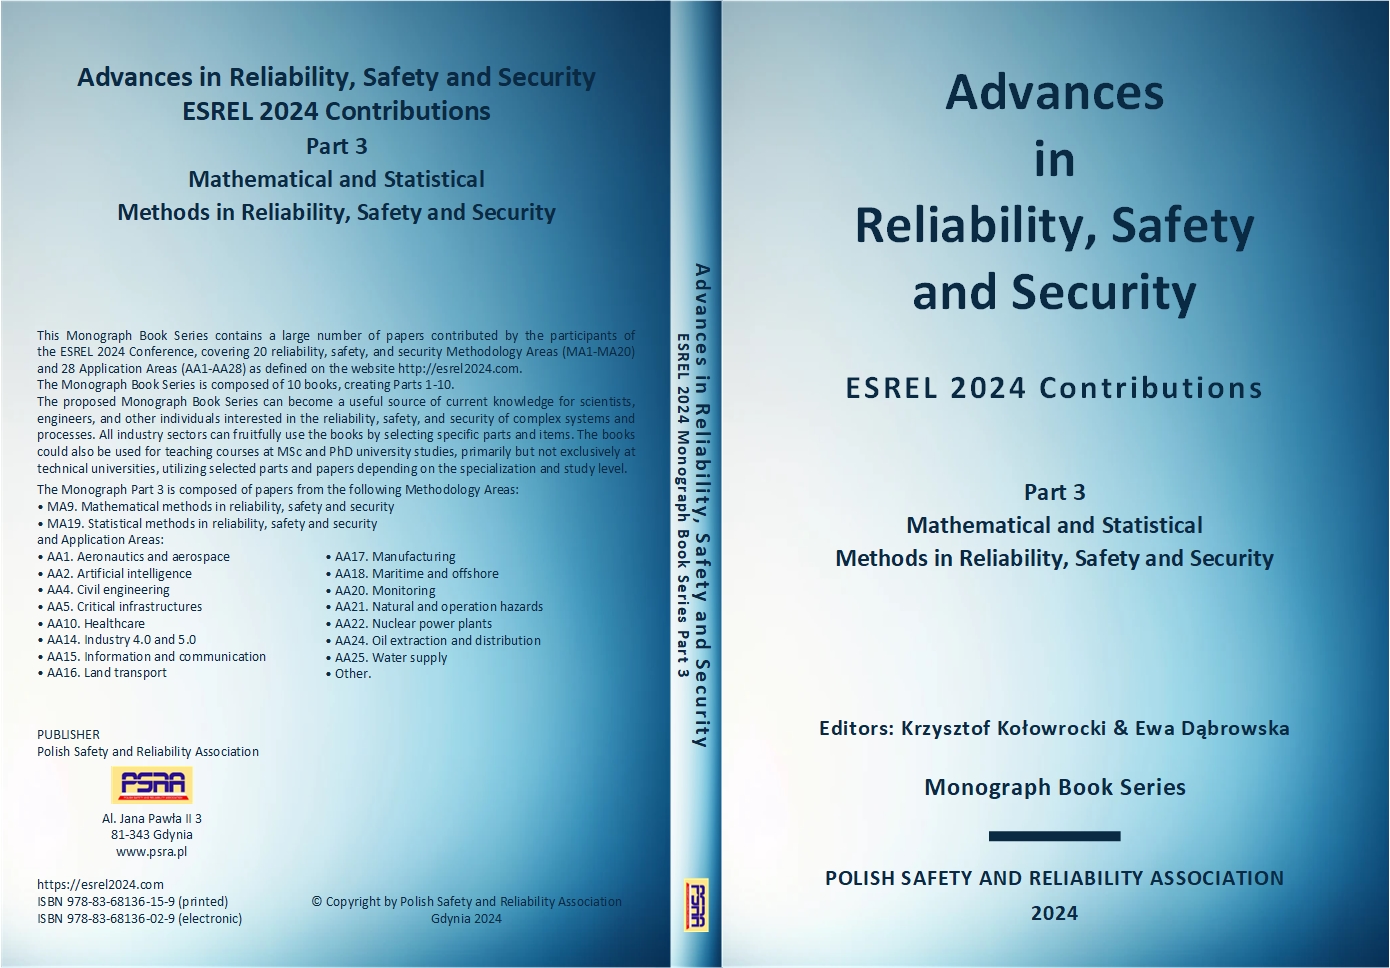 Part 3 Mathematical and Statistical Methods in Reliability, Safety and Security